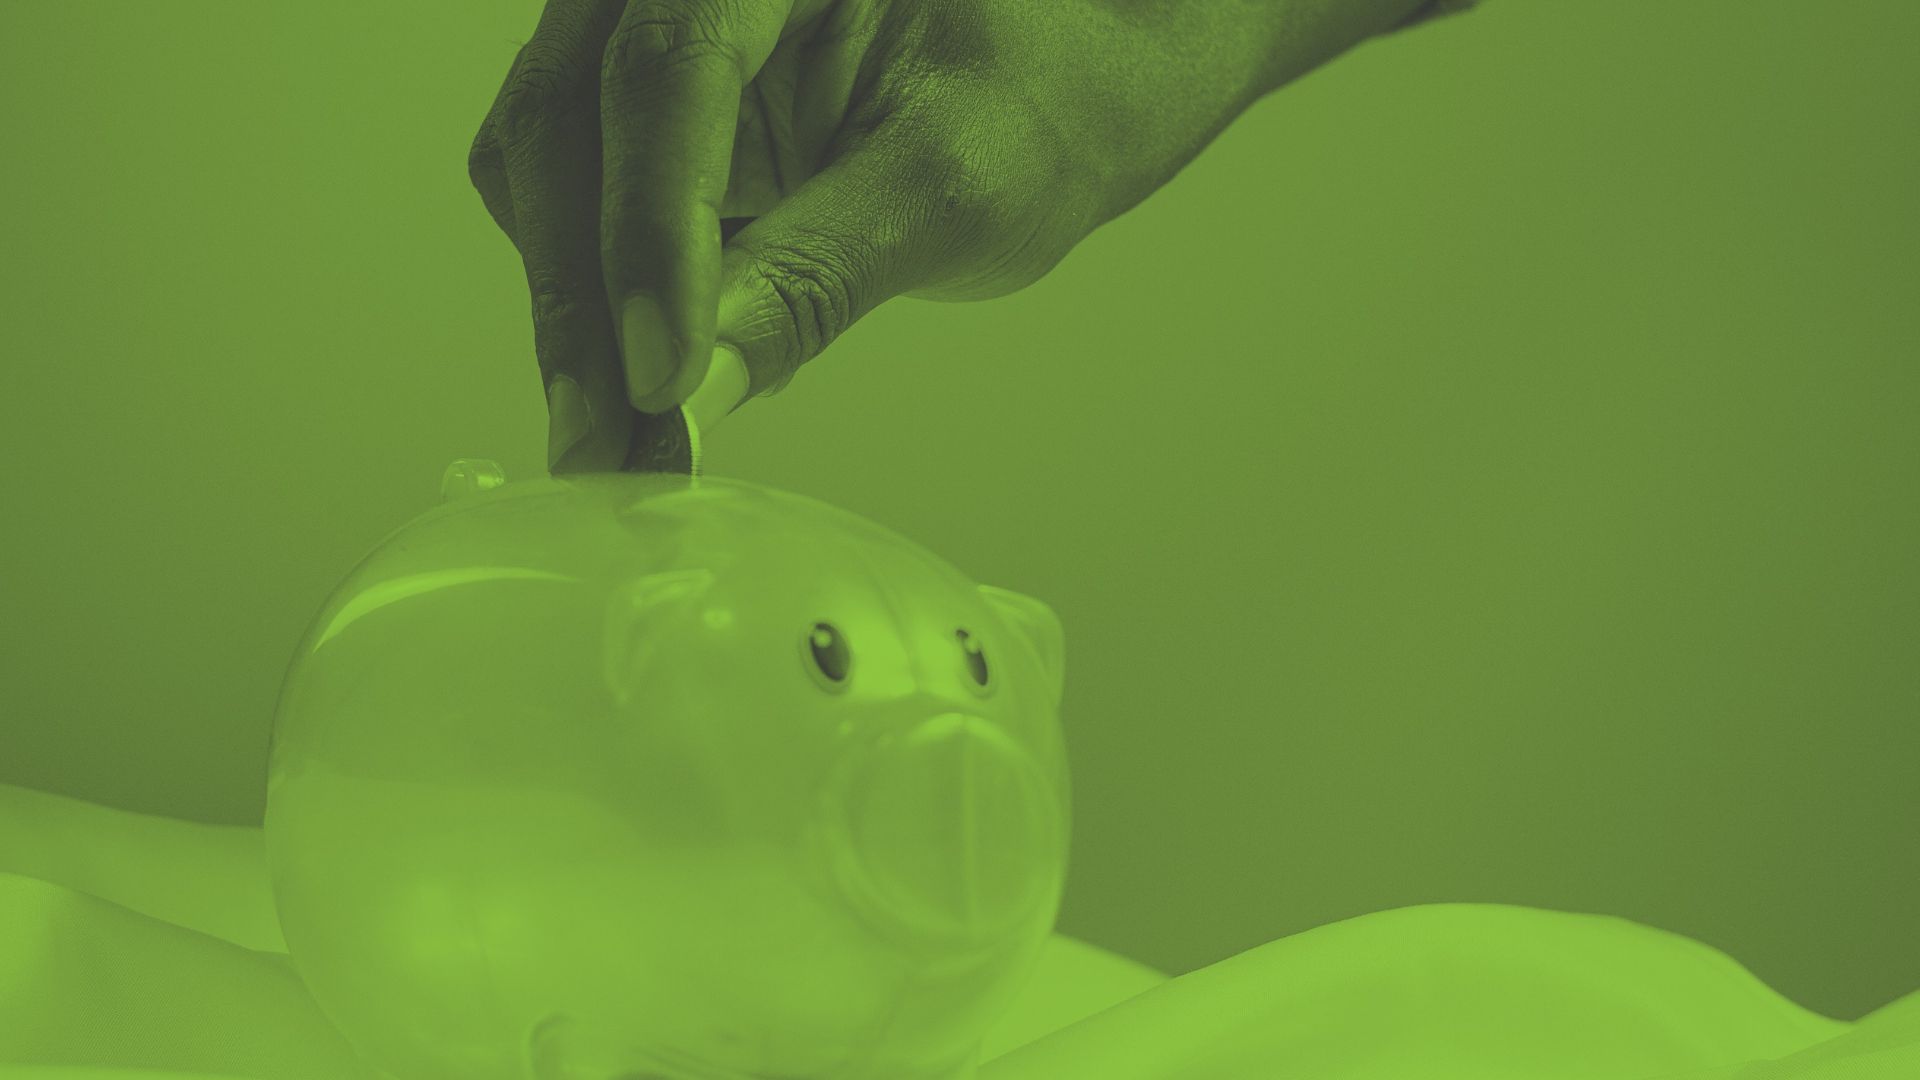 An image of a child putting money into a piggy bank